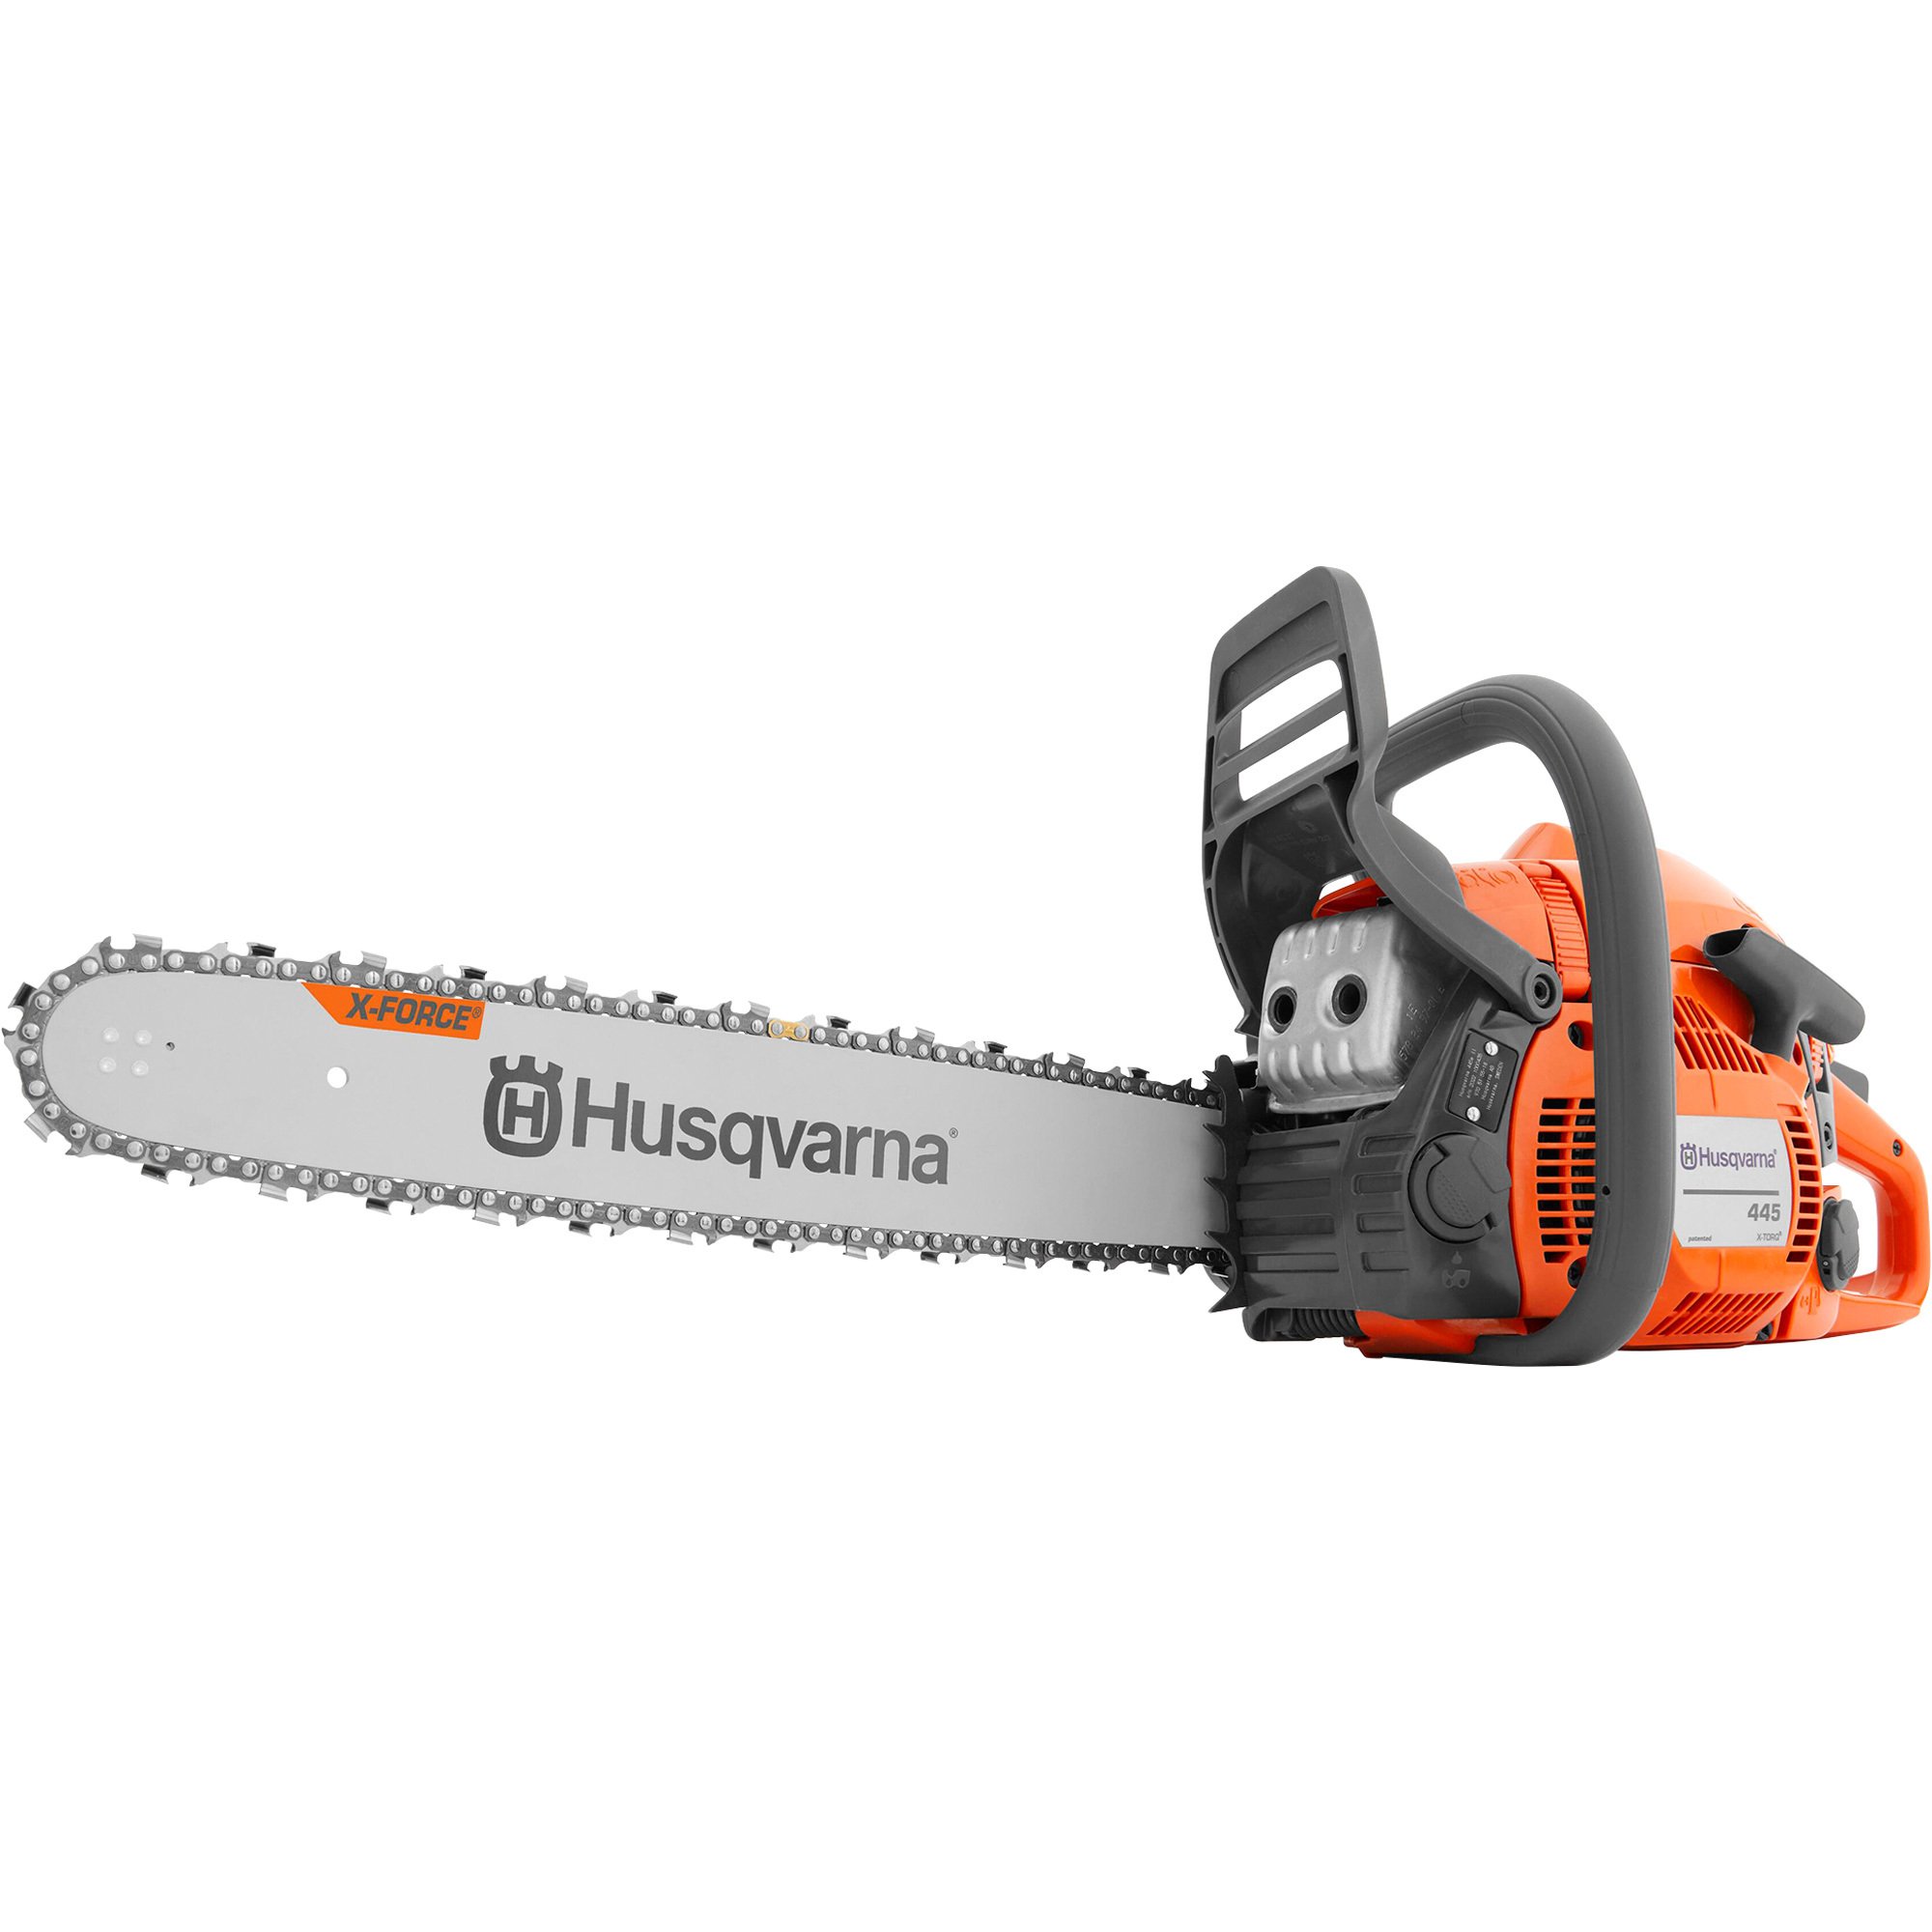 Stihl Gas-Powered Chainsaw, 16in. Bar, 31.9cc Engine, 3/8PM3 Chain Pitch,  Model# MS 180